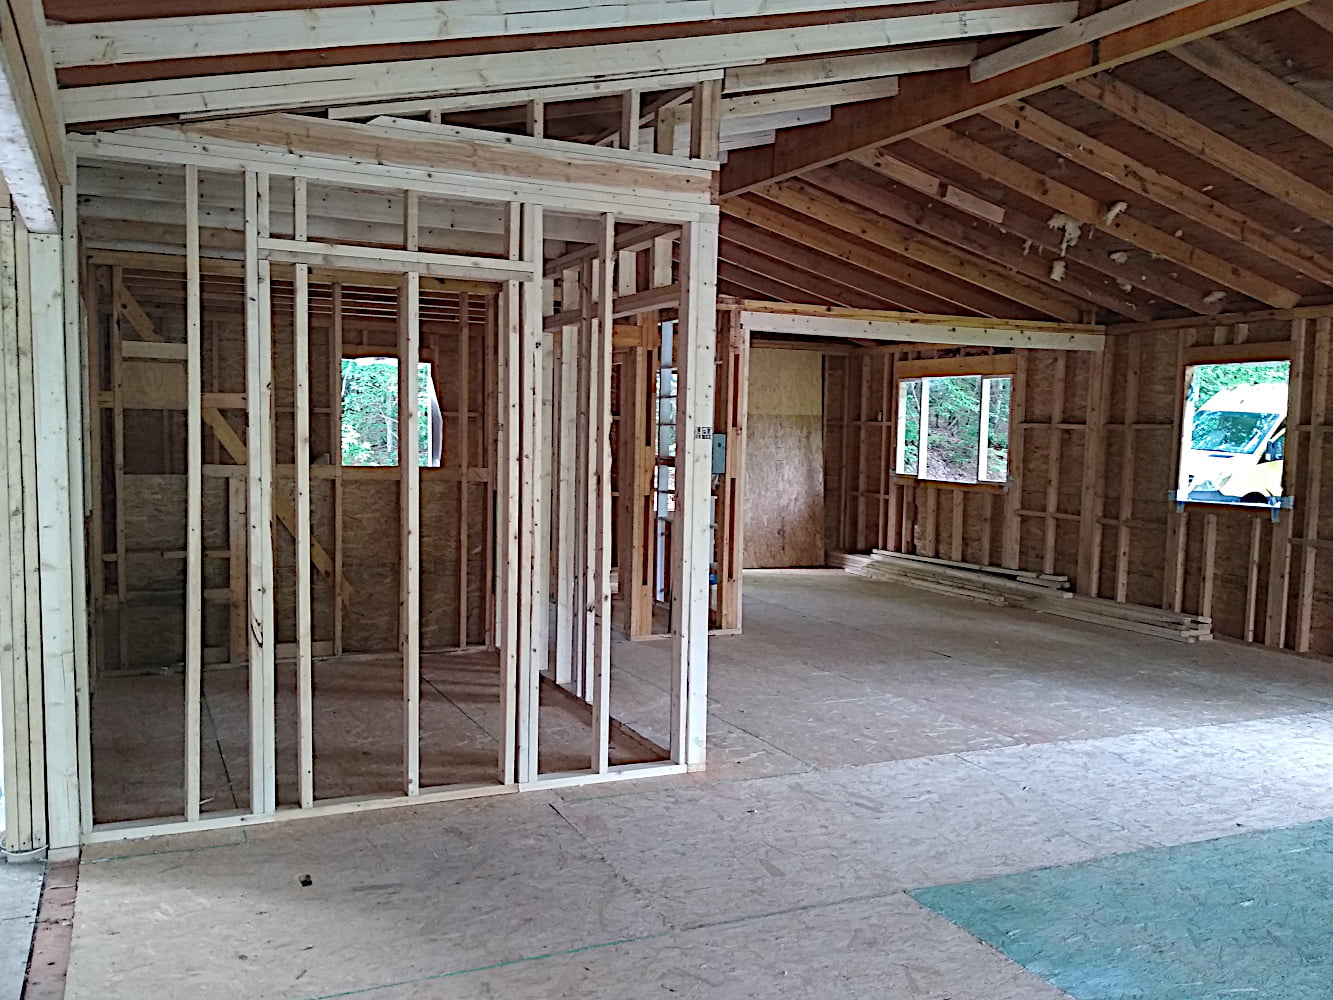 View through living room, kitchen, and pantry toward southwest corner